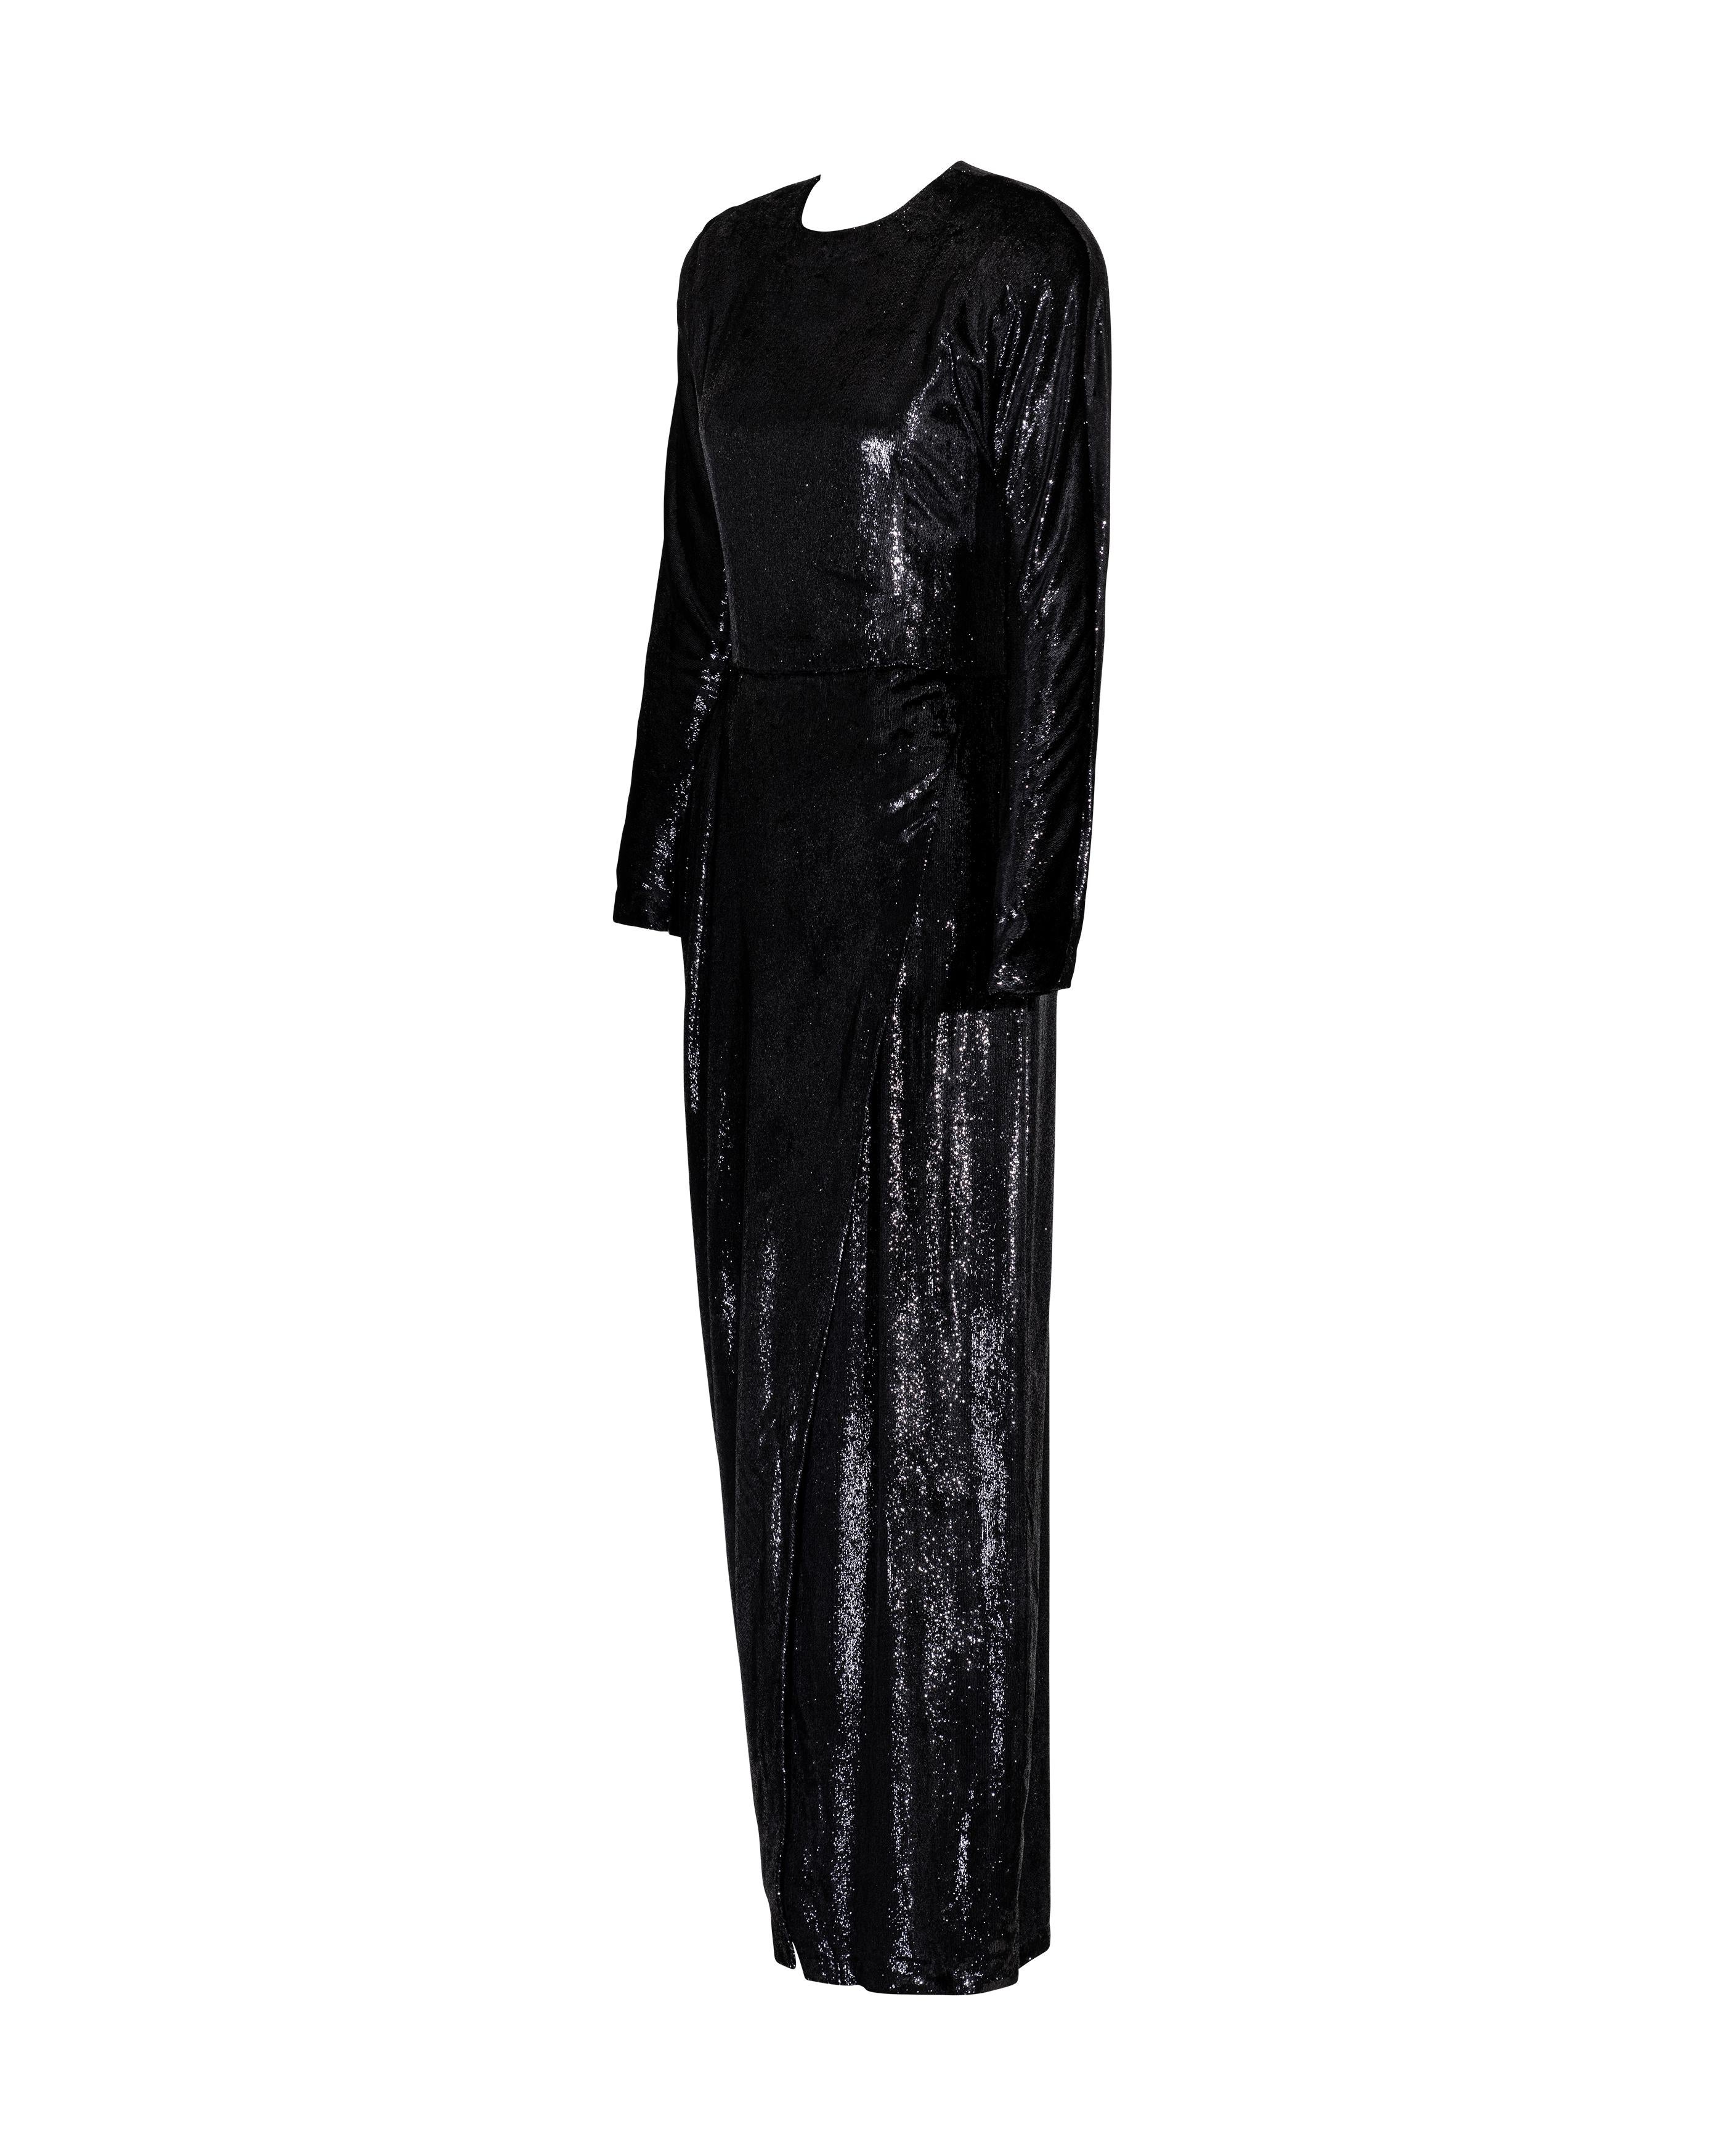 A/W 1989 Geoffrey Beene Black Lamé Long Sleeve Gown In Excellent Condition For Sale In North Hollywood, CA